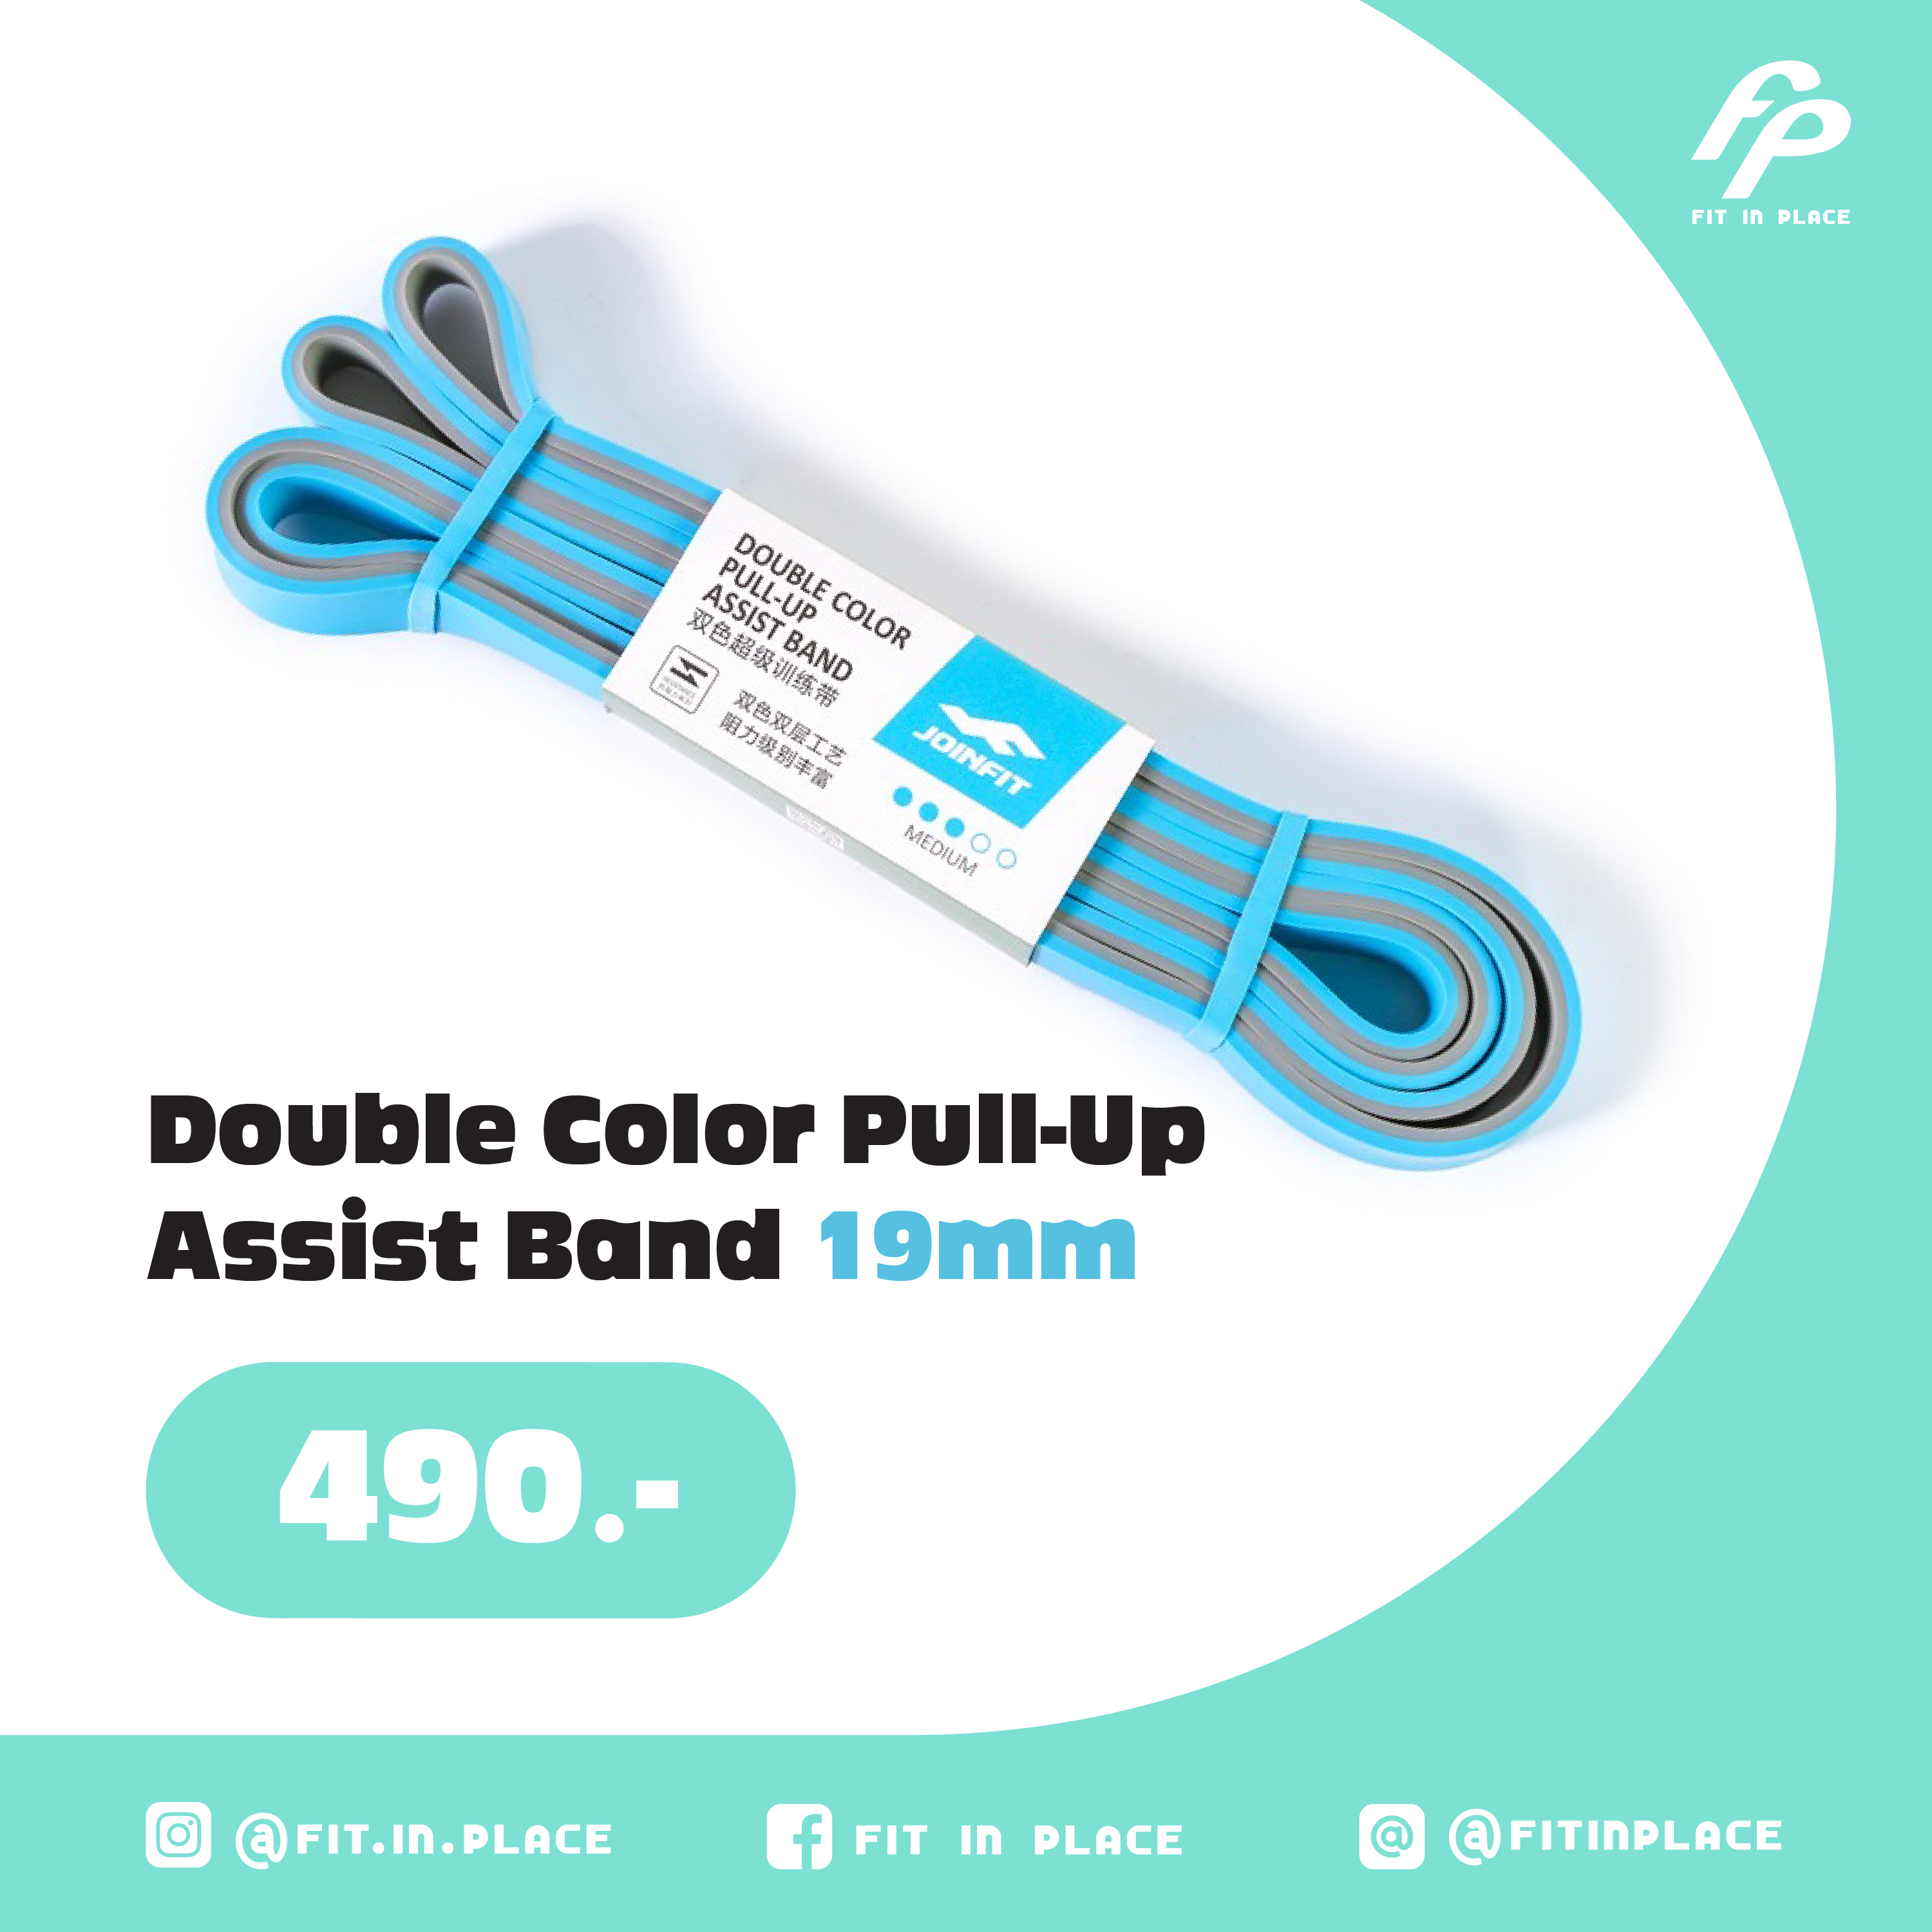 Fit in Place - Joinfit Double Color Pull-up Assist Band 19mm